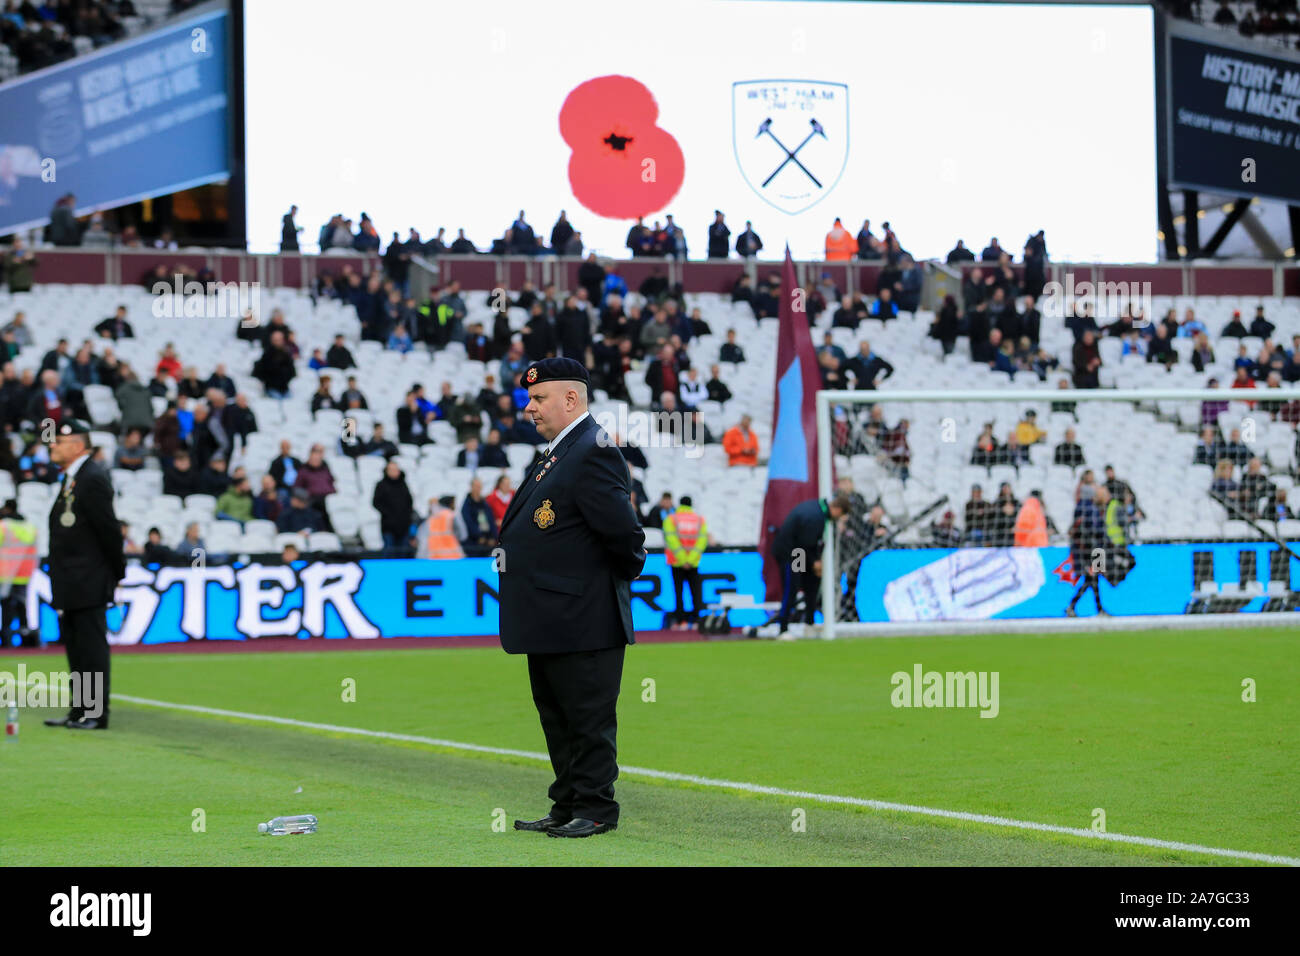 London, UK. 02nd Nov, 2019. Veterans line up before the Premier League match between West Ham United and Newcastle United at the Boleyn Ground, London on Saturday 2nd November 2019 in support of armistice day. (Credit: Leila Coker | MI News) Photograph may only be used for newspaper and/or magazine editorial purposes, license required for commercial use Credit: MI News & Sport /Alamy Live News Credit: MI News & Sport /Alamy Live News Credit: MI News & Sport /Alamy Live News Stock Photo